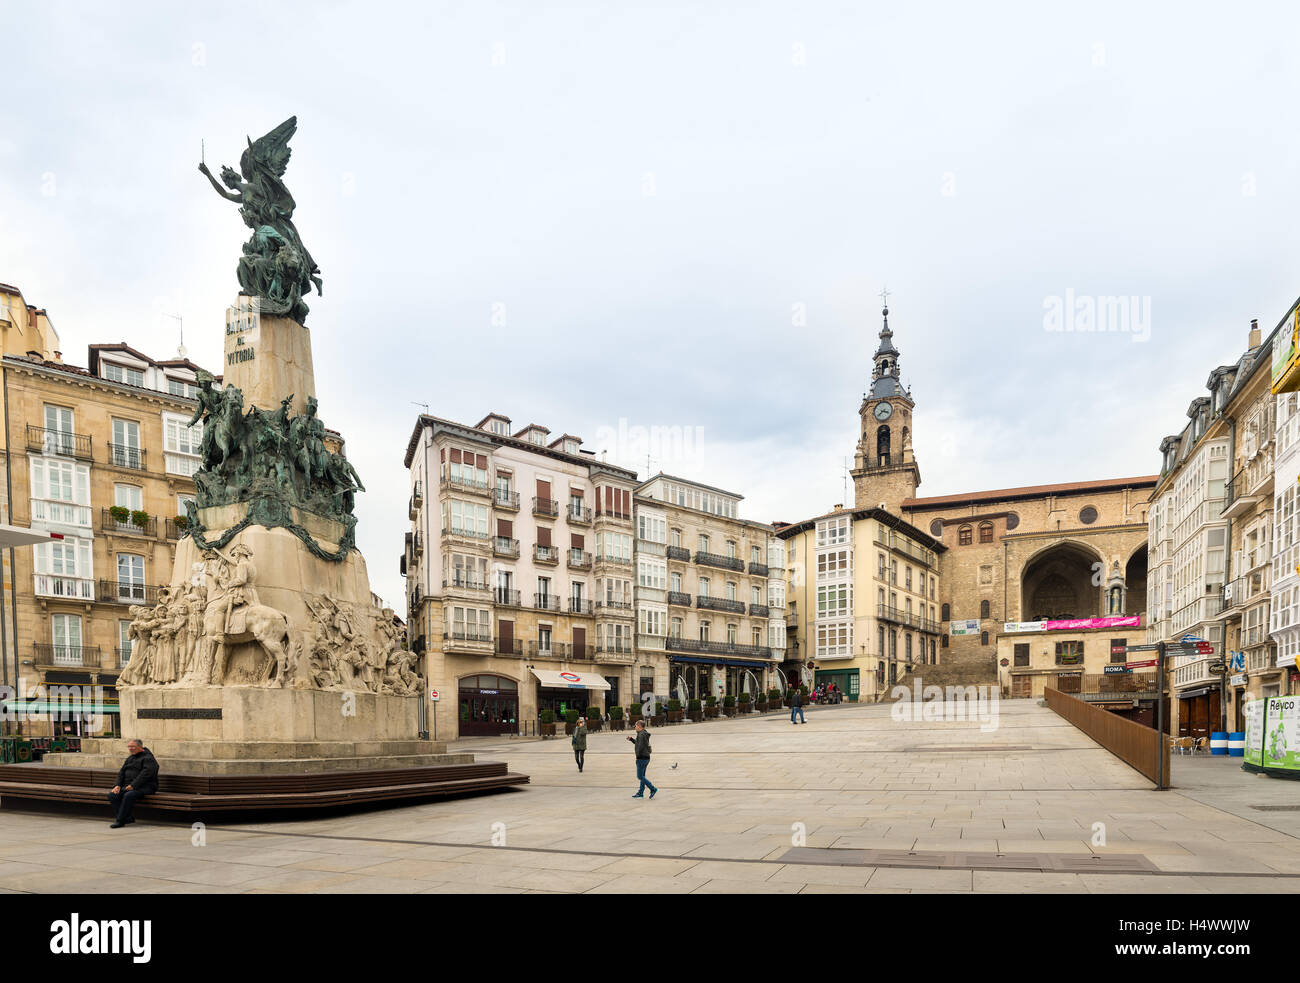 VITORIA-GASTEIZ, SPAIN - OCTOBER 16, 2016: A view of the Virgen Blanca square. At its center stands a monument commemorating the Stock Photo